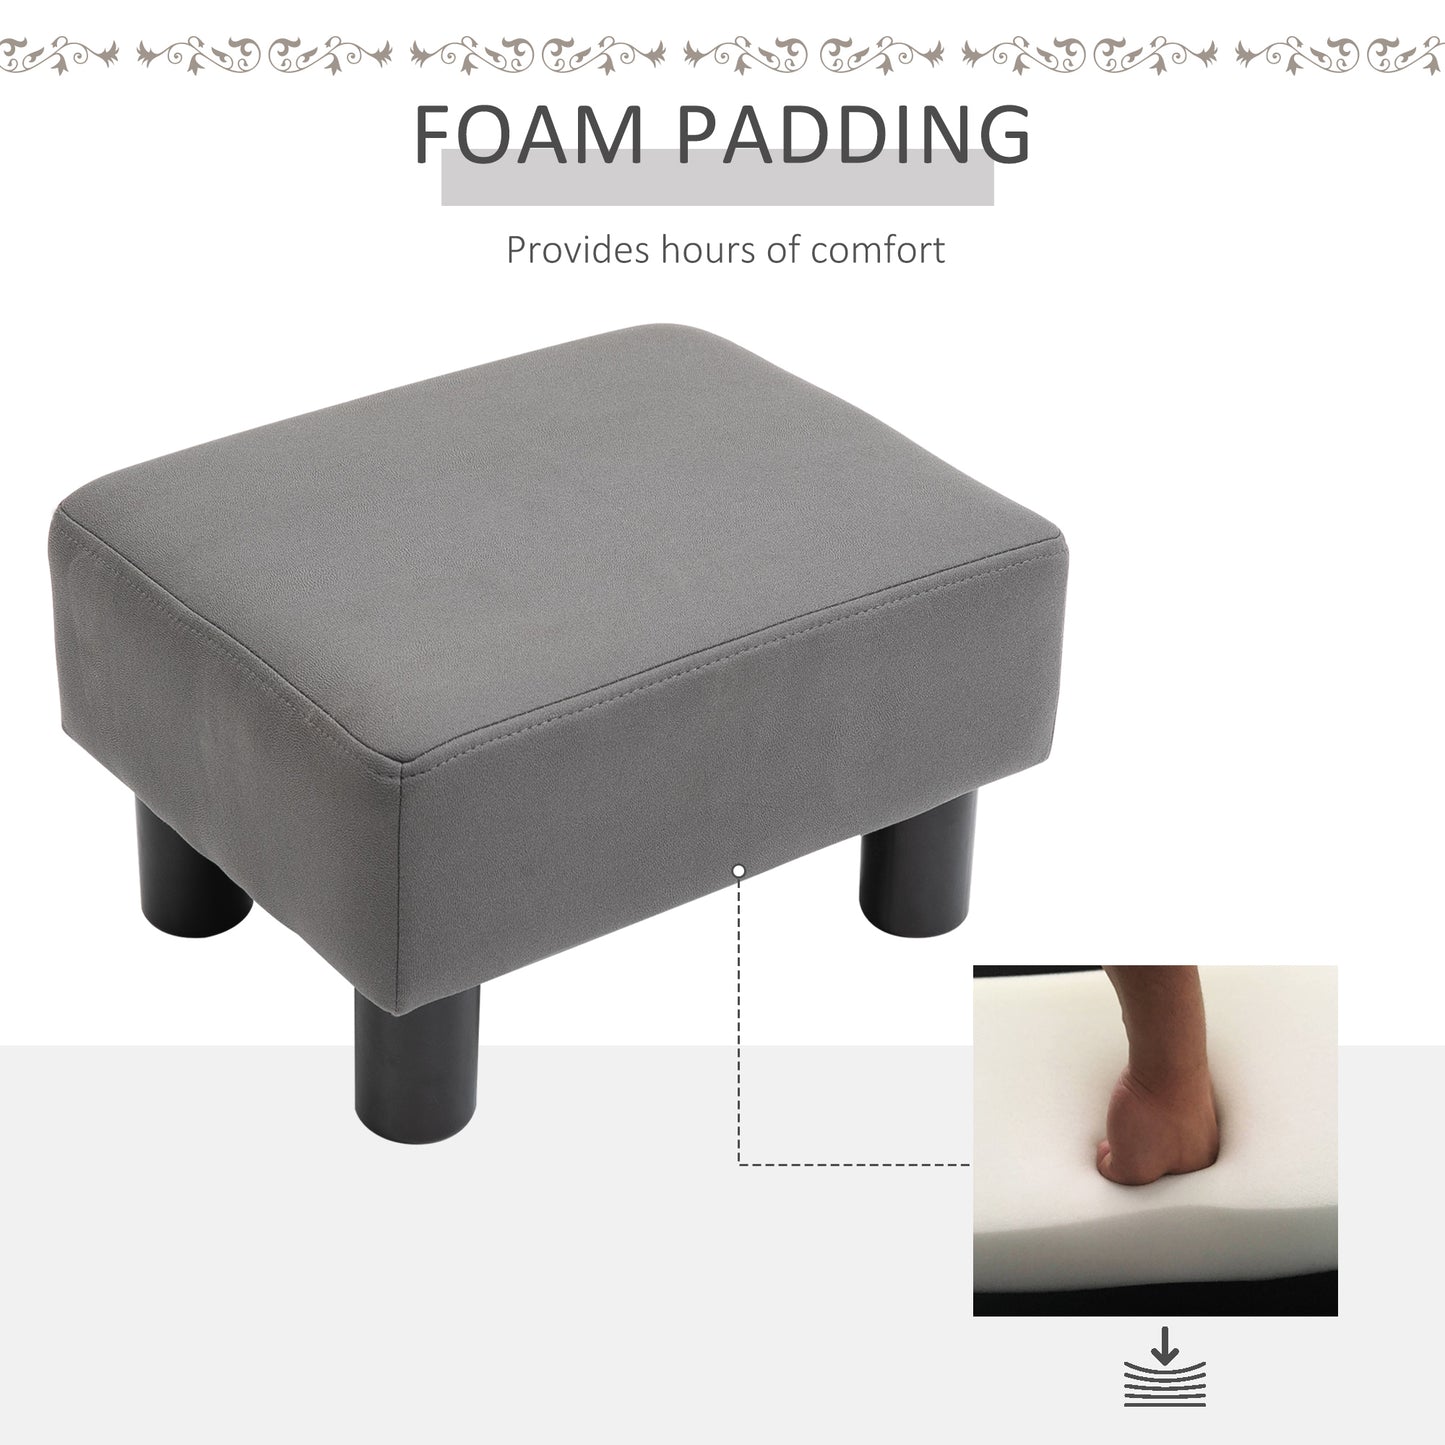 HOMCOM Footstool Ottoman Footrest Seat Chair Luxury Small Grey Home Office